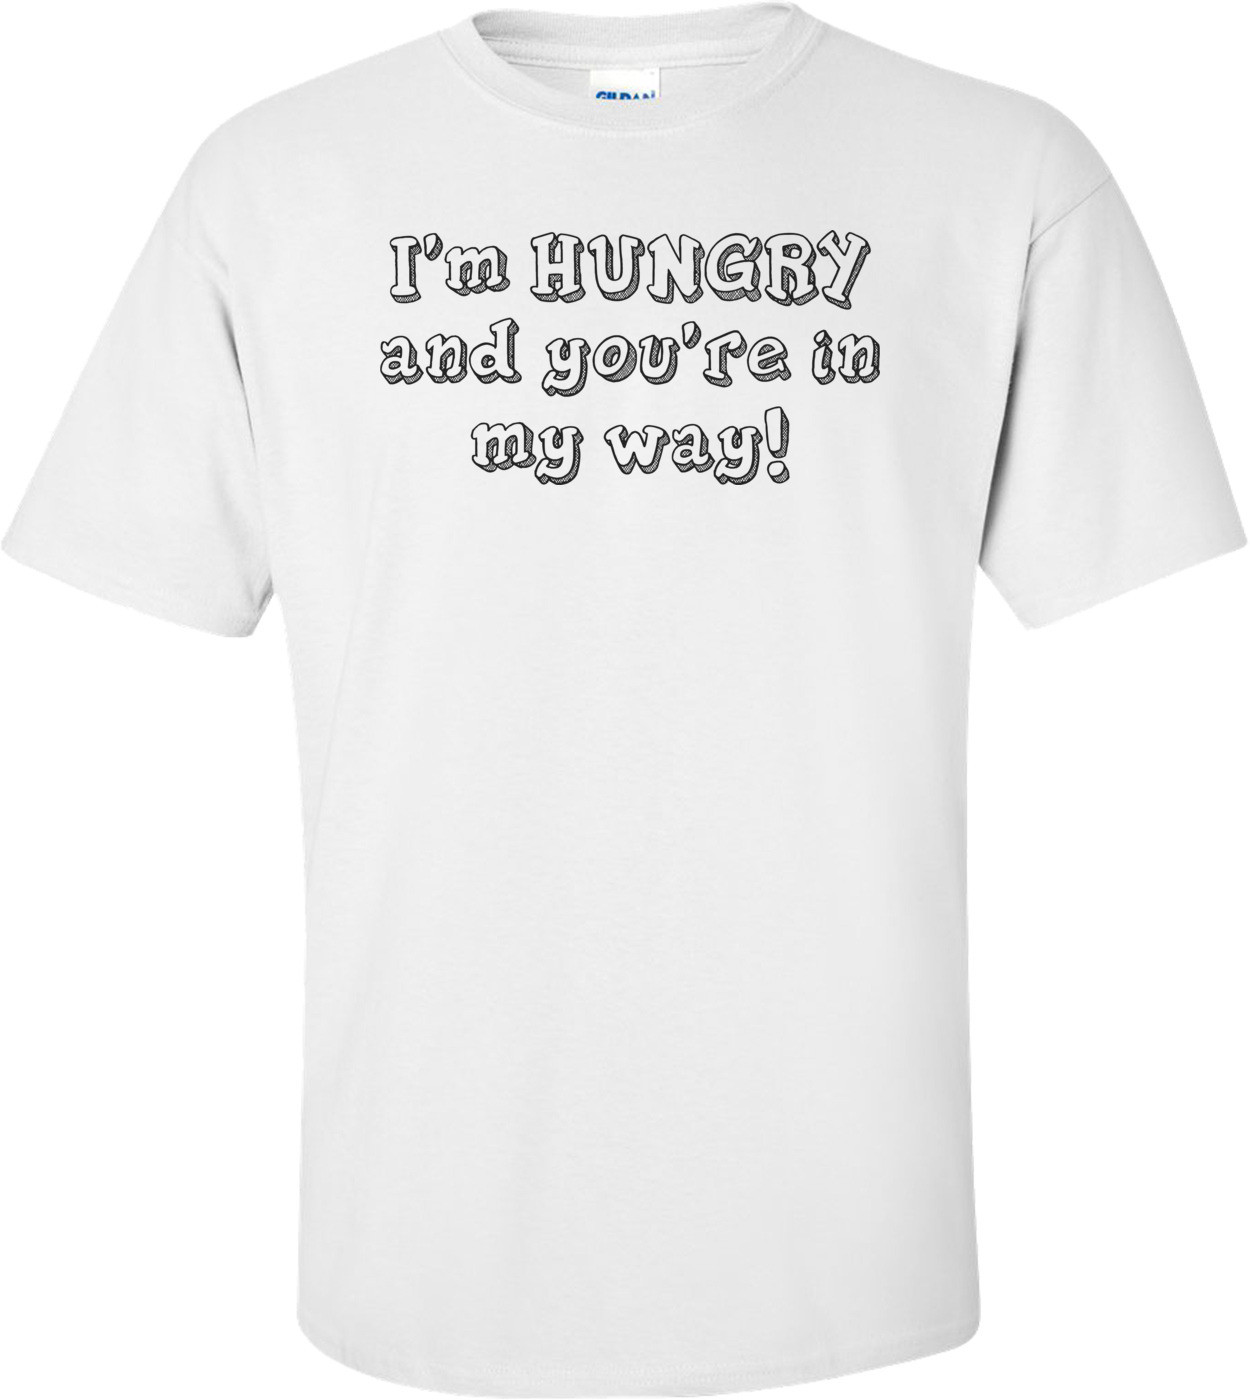 I'm HUNGRY and you're in my way! Shirt